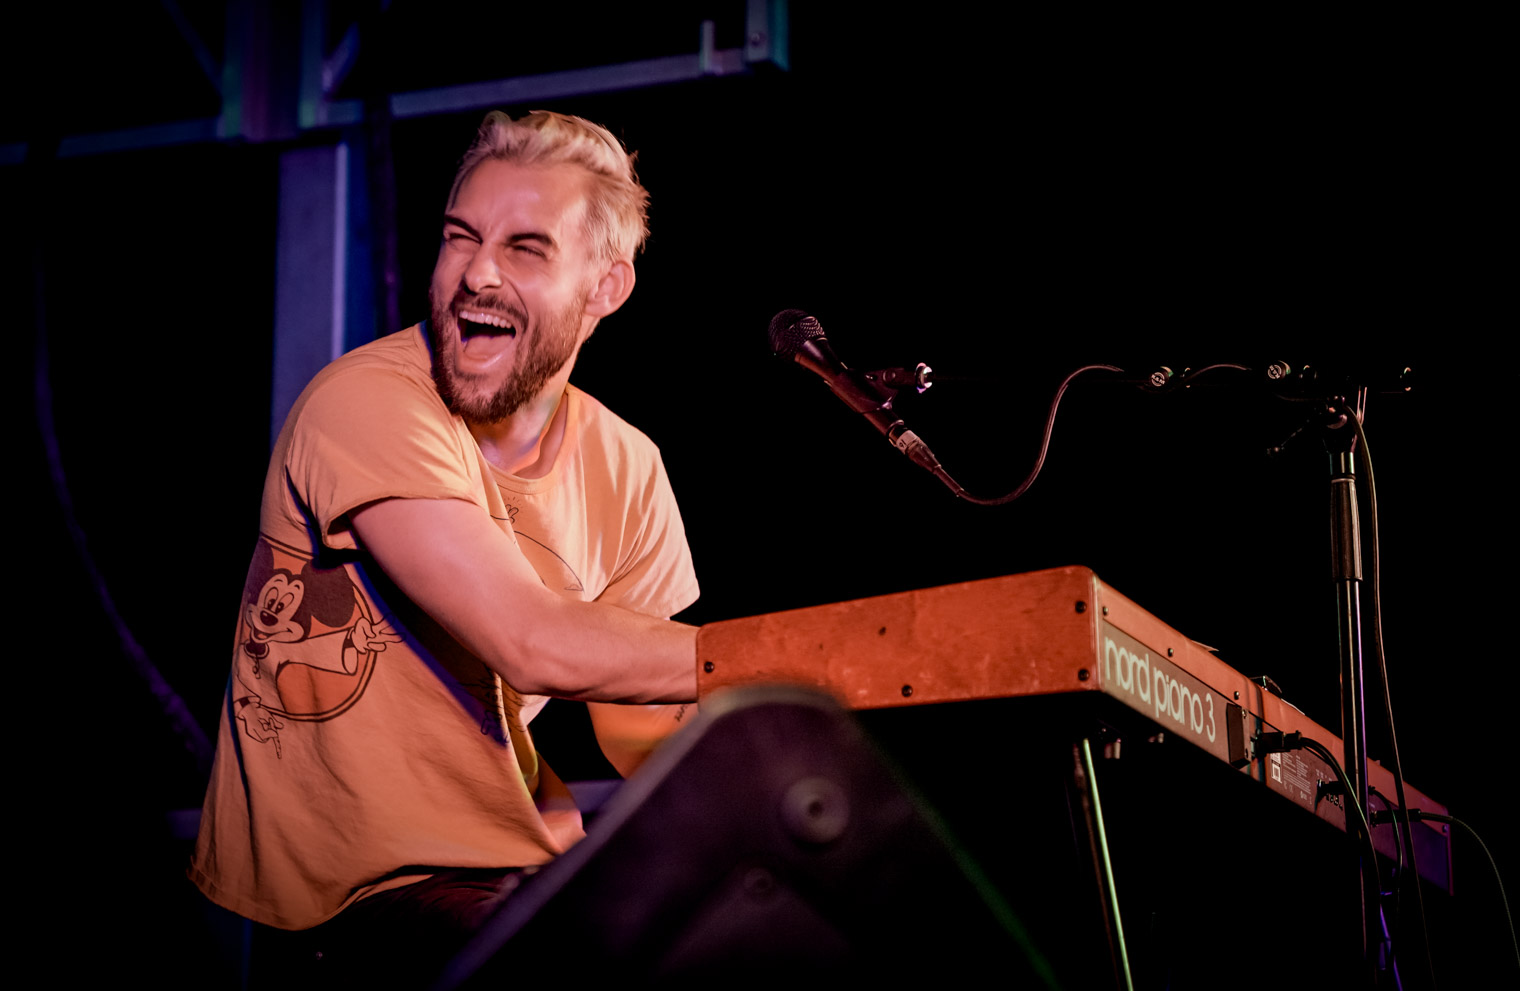 A musician playing keyboard and laughing on stage